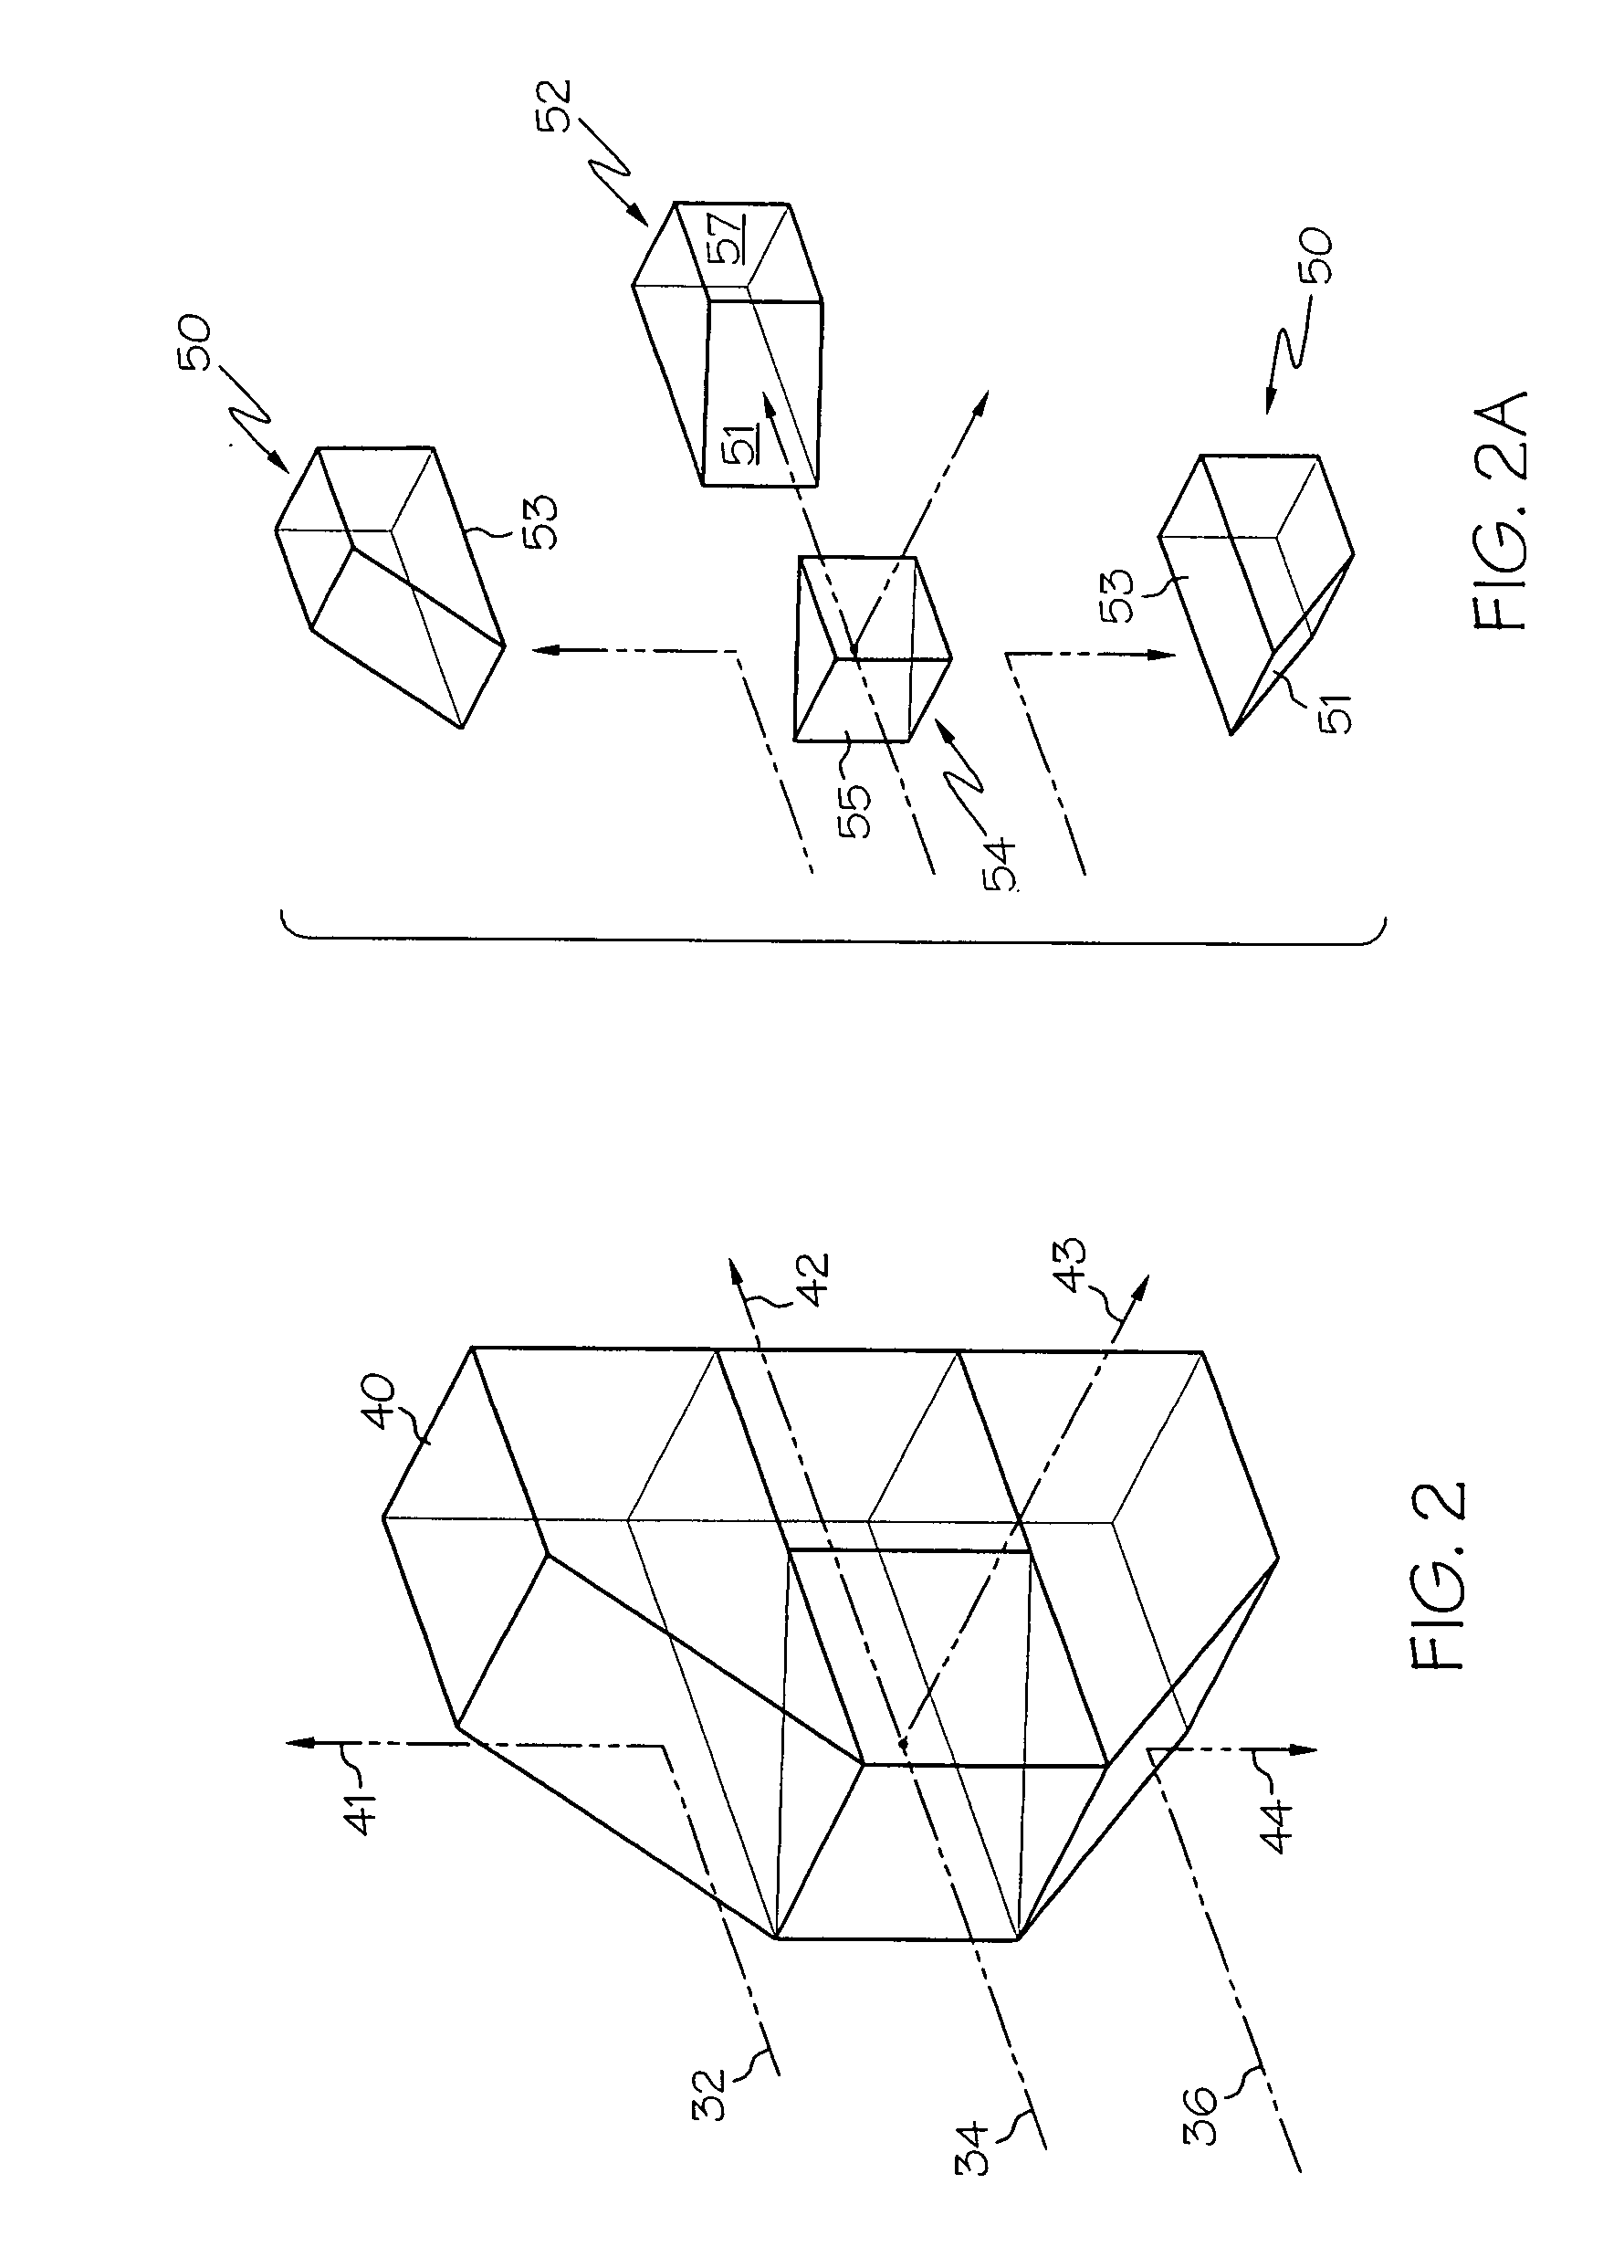 Optical system providing several beams from a single source